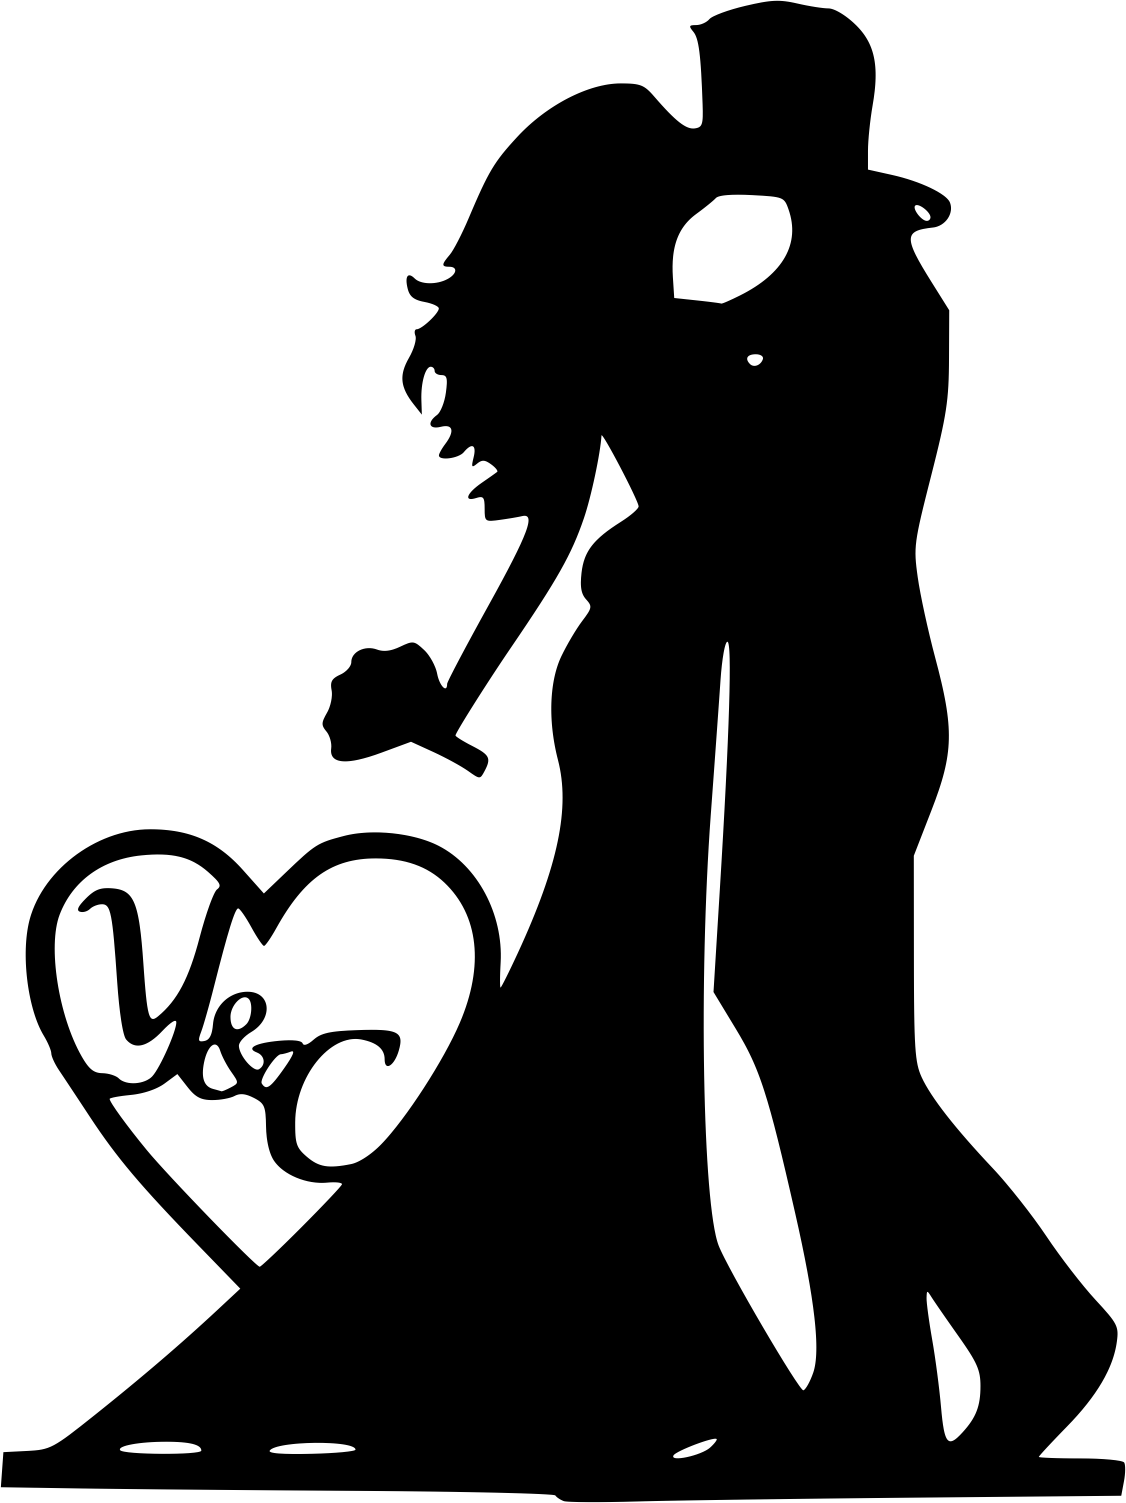 Mr and Mrs Silhouette Black Bride and Groom Vector Free Vector